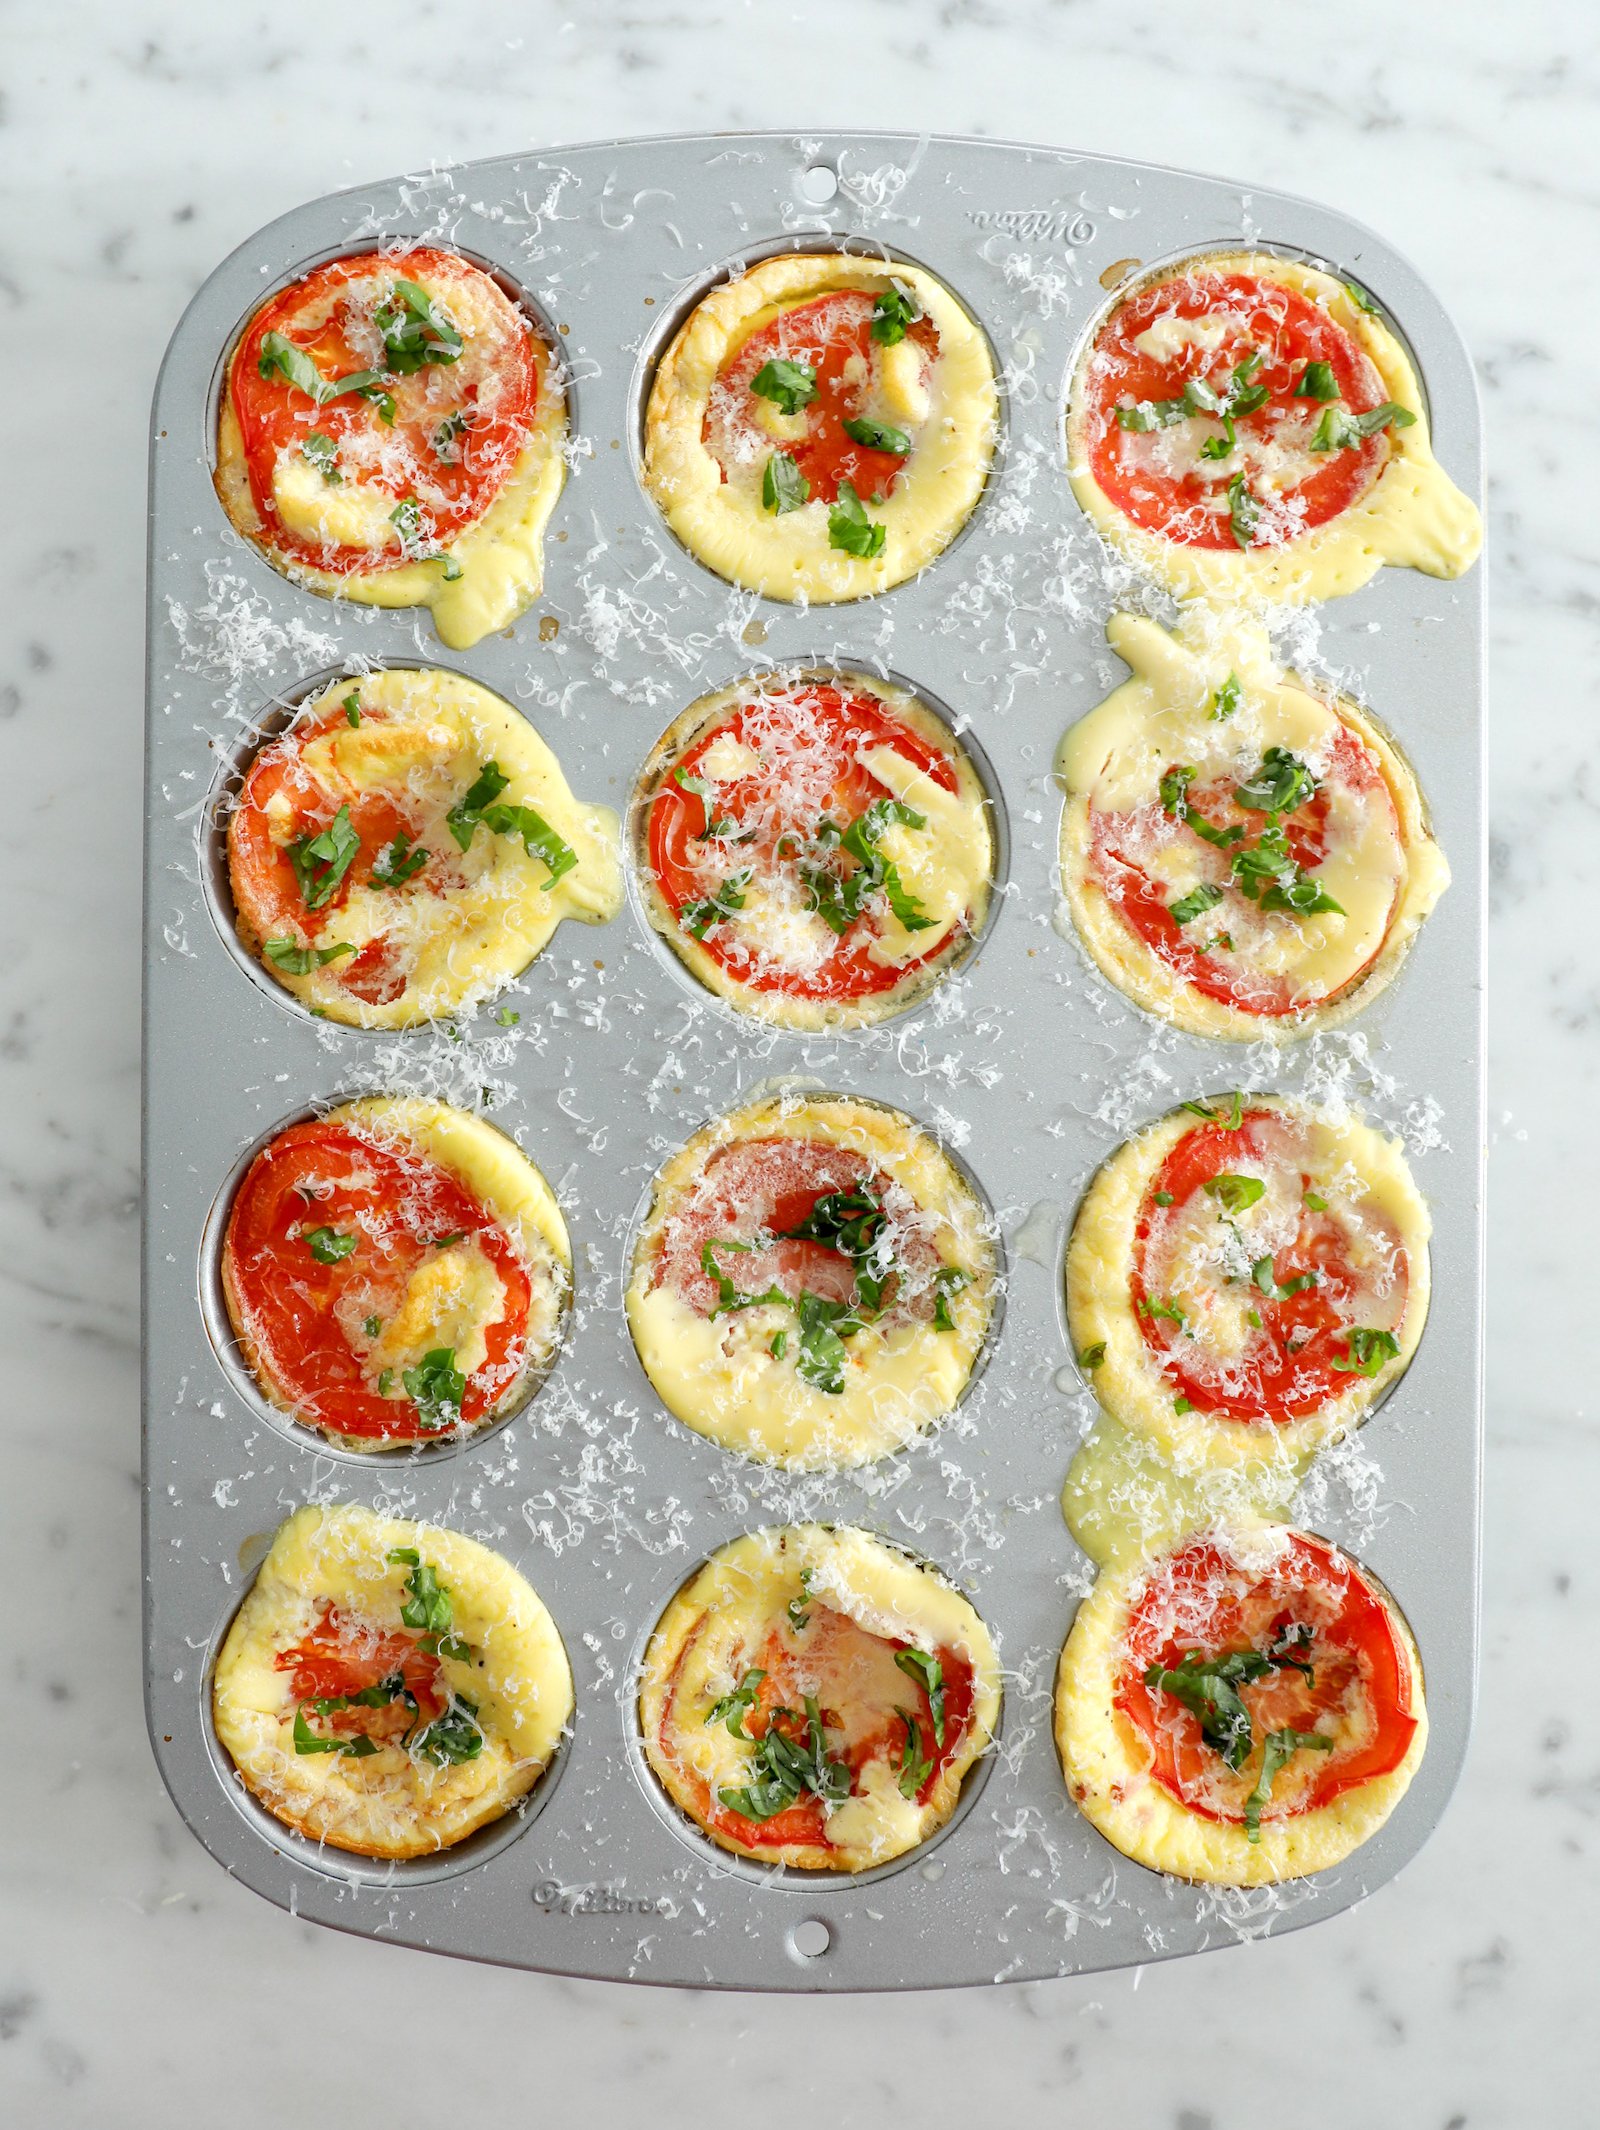 12 high protein egg bites shown cooked in a metal muffin tin and garnished with fresh basil and grated parmesan cheese